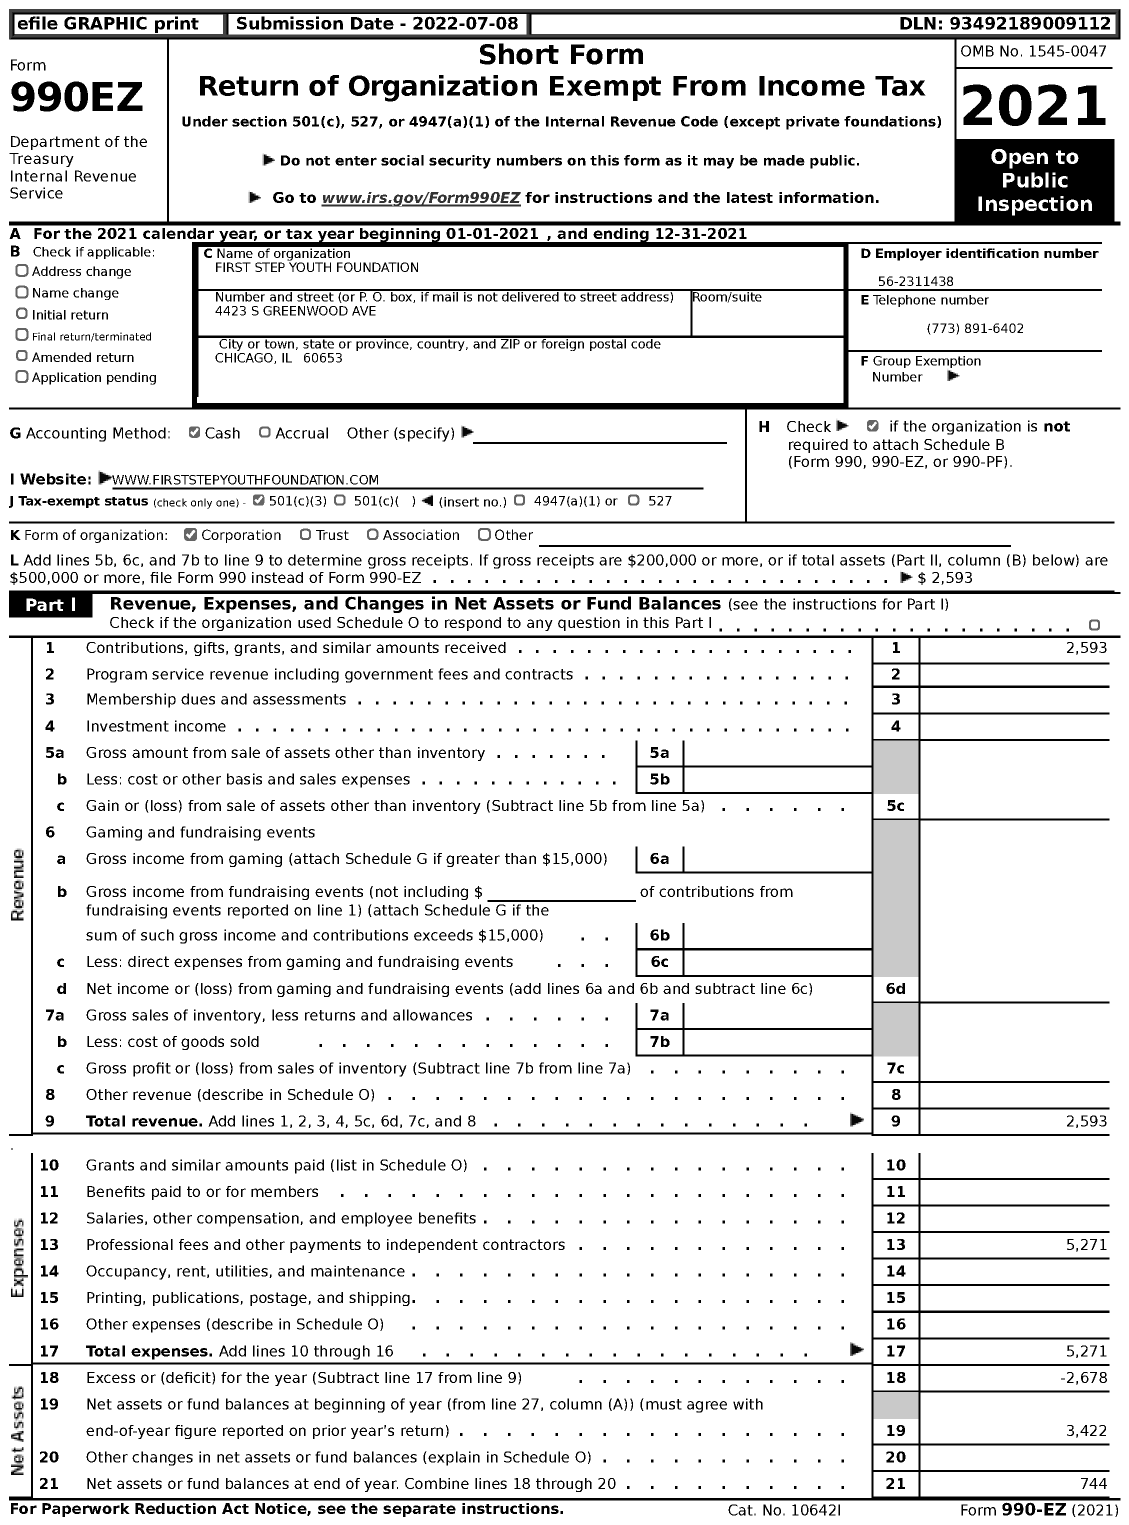 Image of first page of 2021 Form 990EZ for First Step Youth Foundation